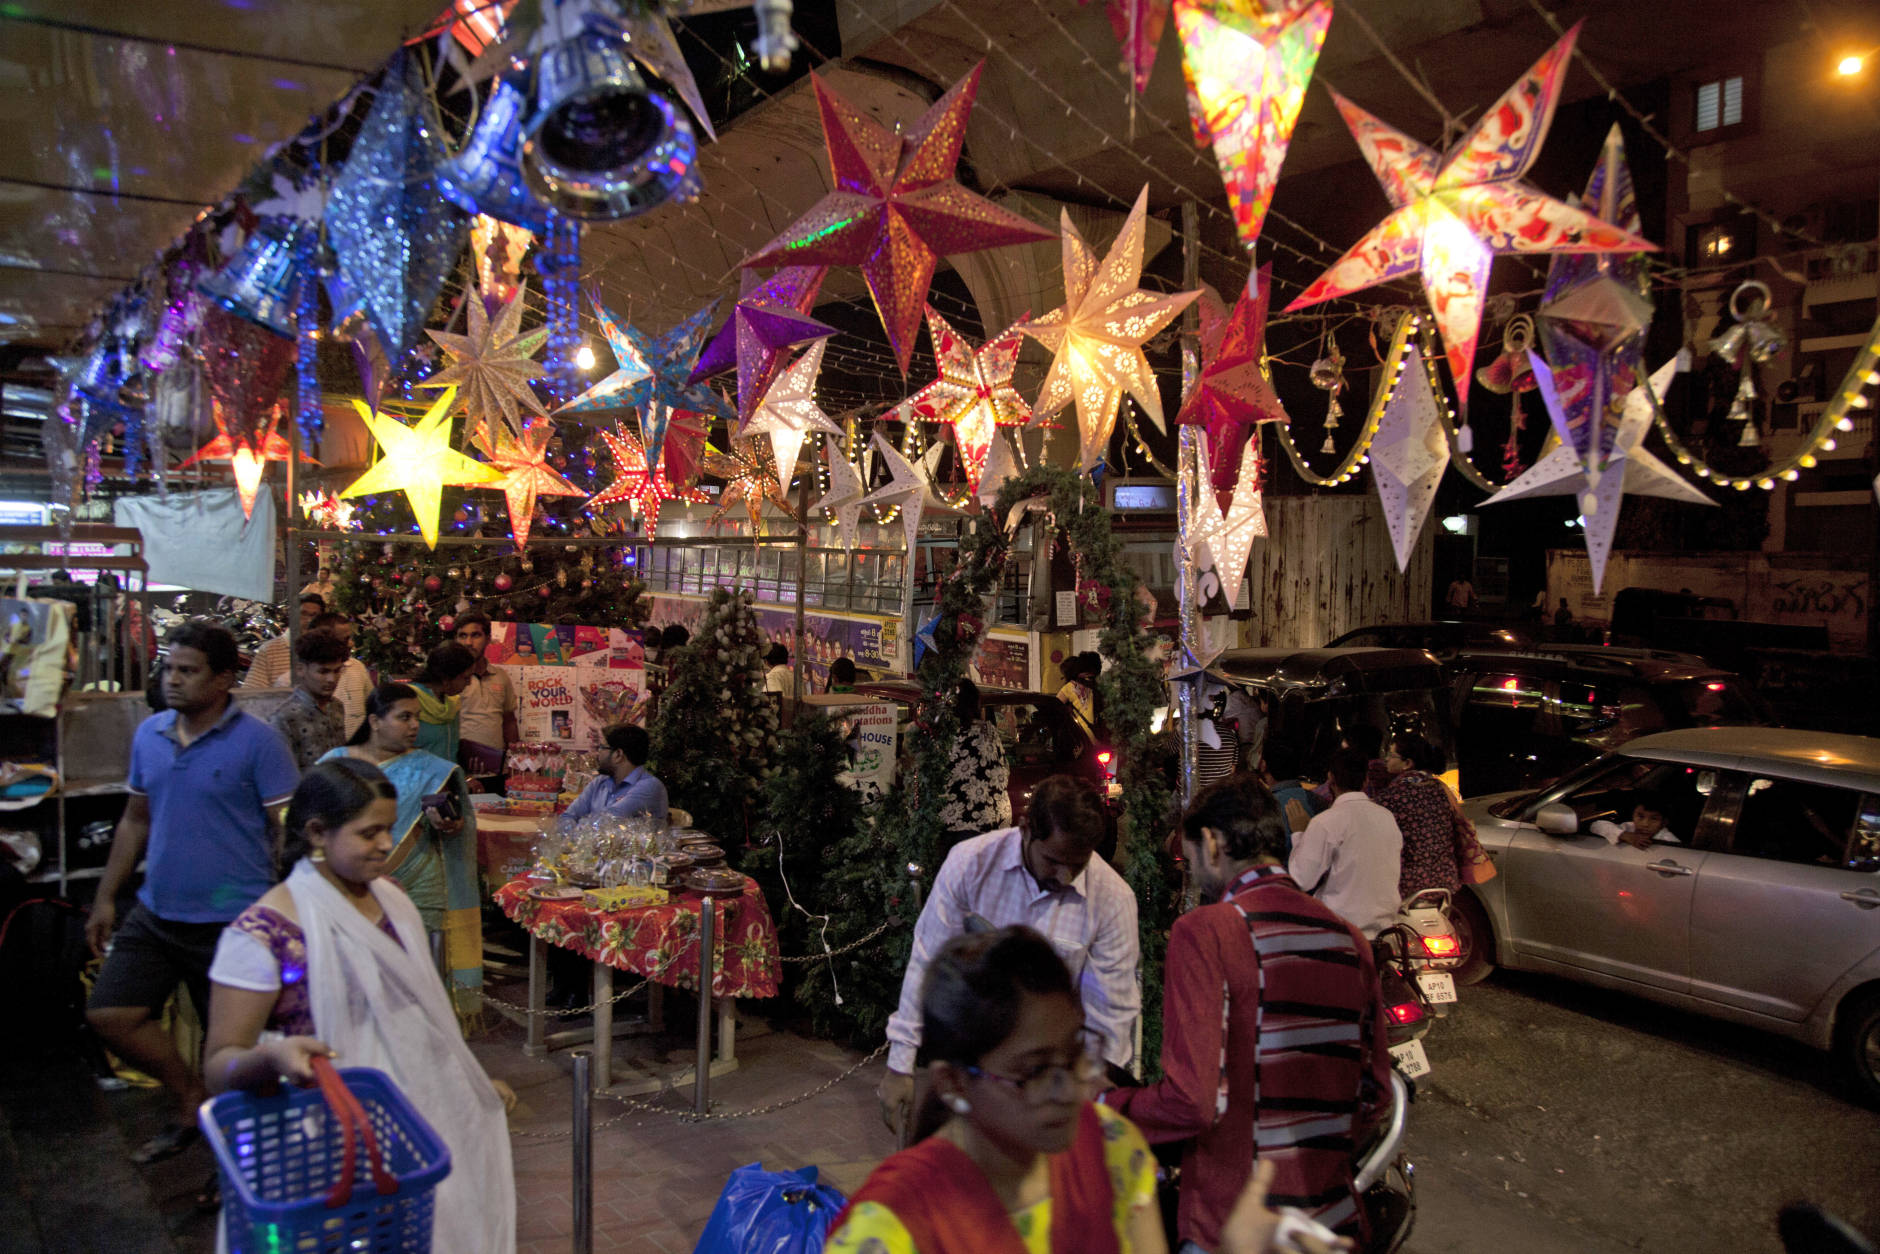 Indians shop on the eve of Christmas in Hyderabad, India, Saturday, Dec. 24, 2016. Though the Hindus and Muslims comprise majority of the population in India, Christmas is a national holiday celebrated with much fanfare. (AP Photo/Mahesh Kumar A.)